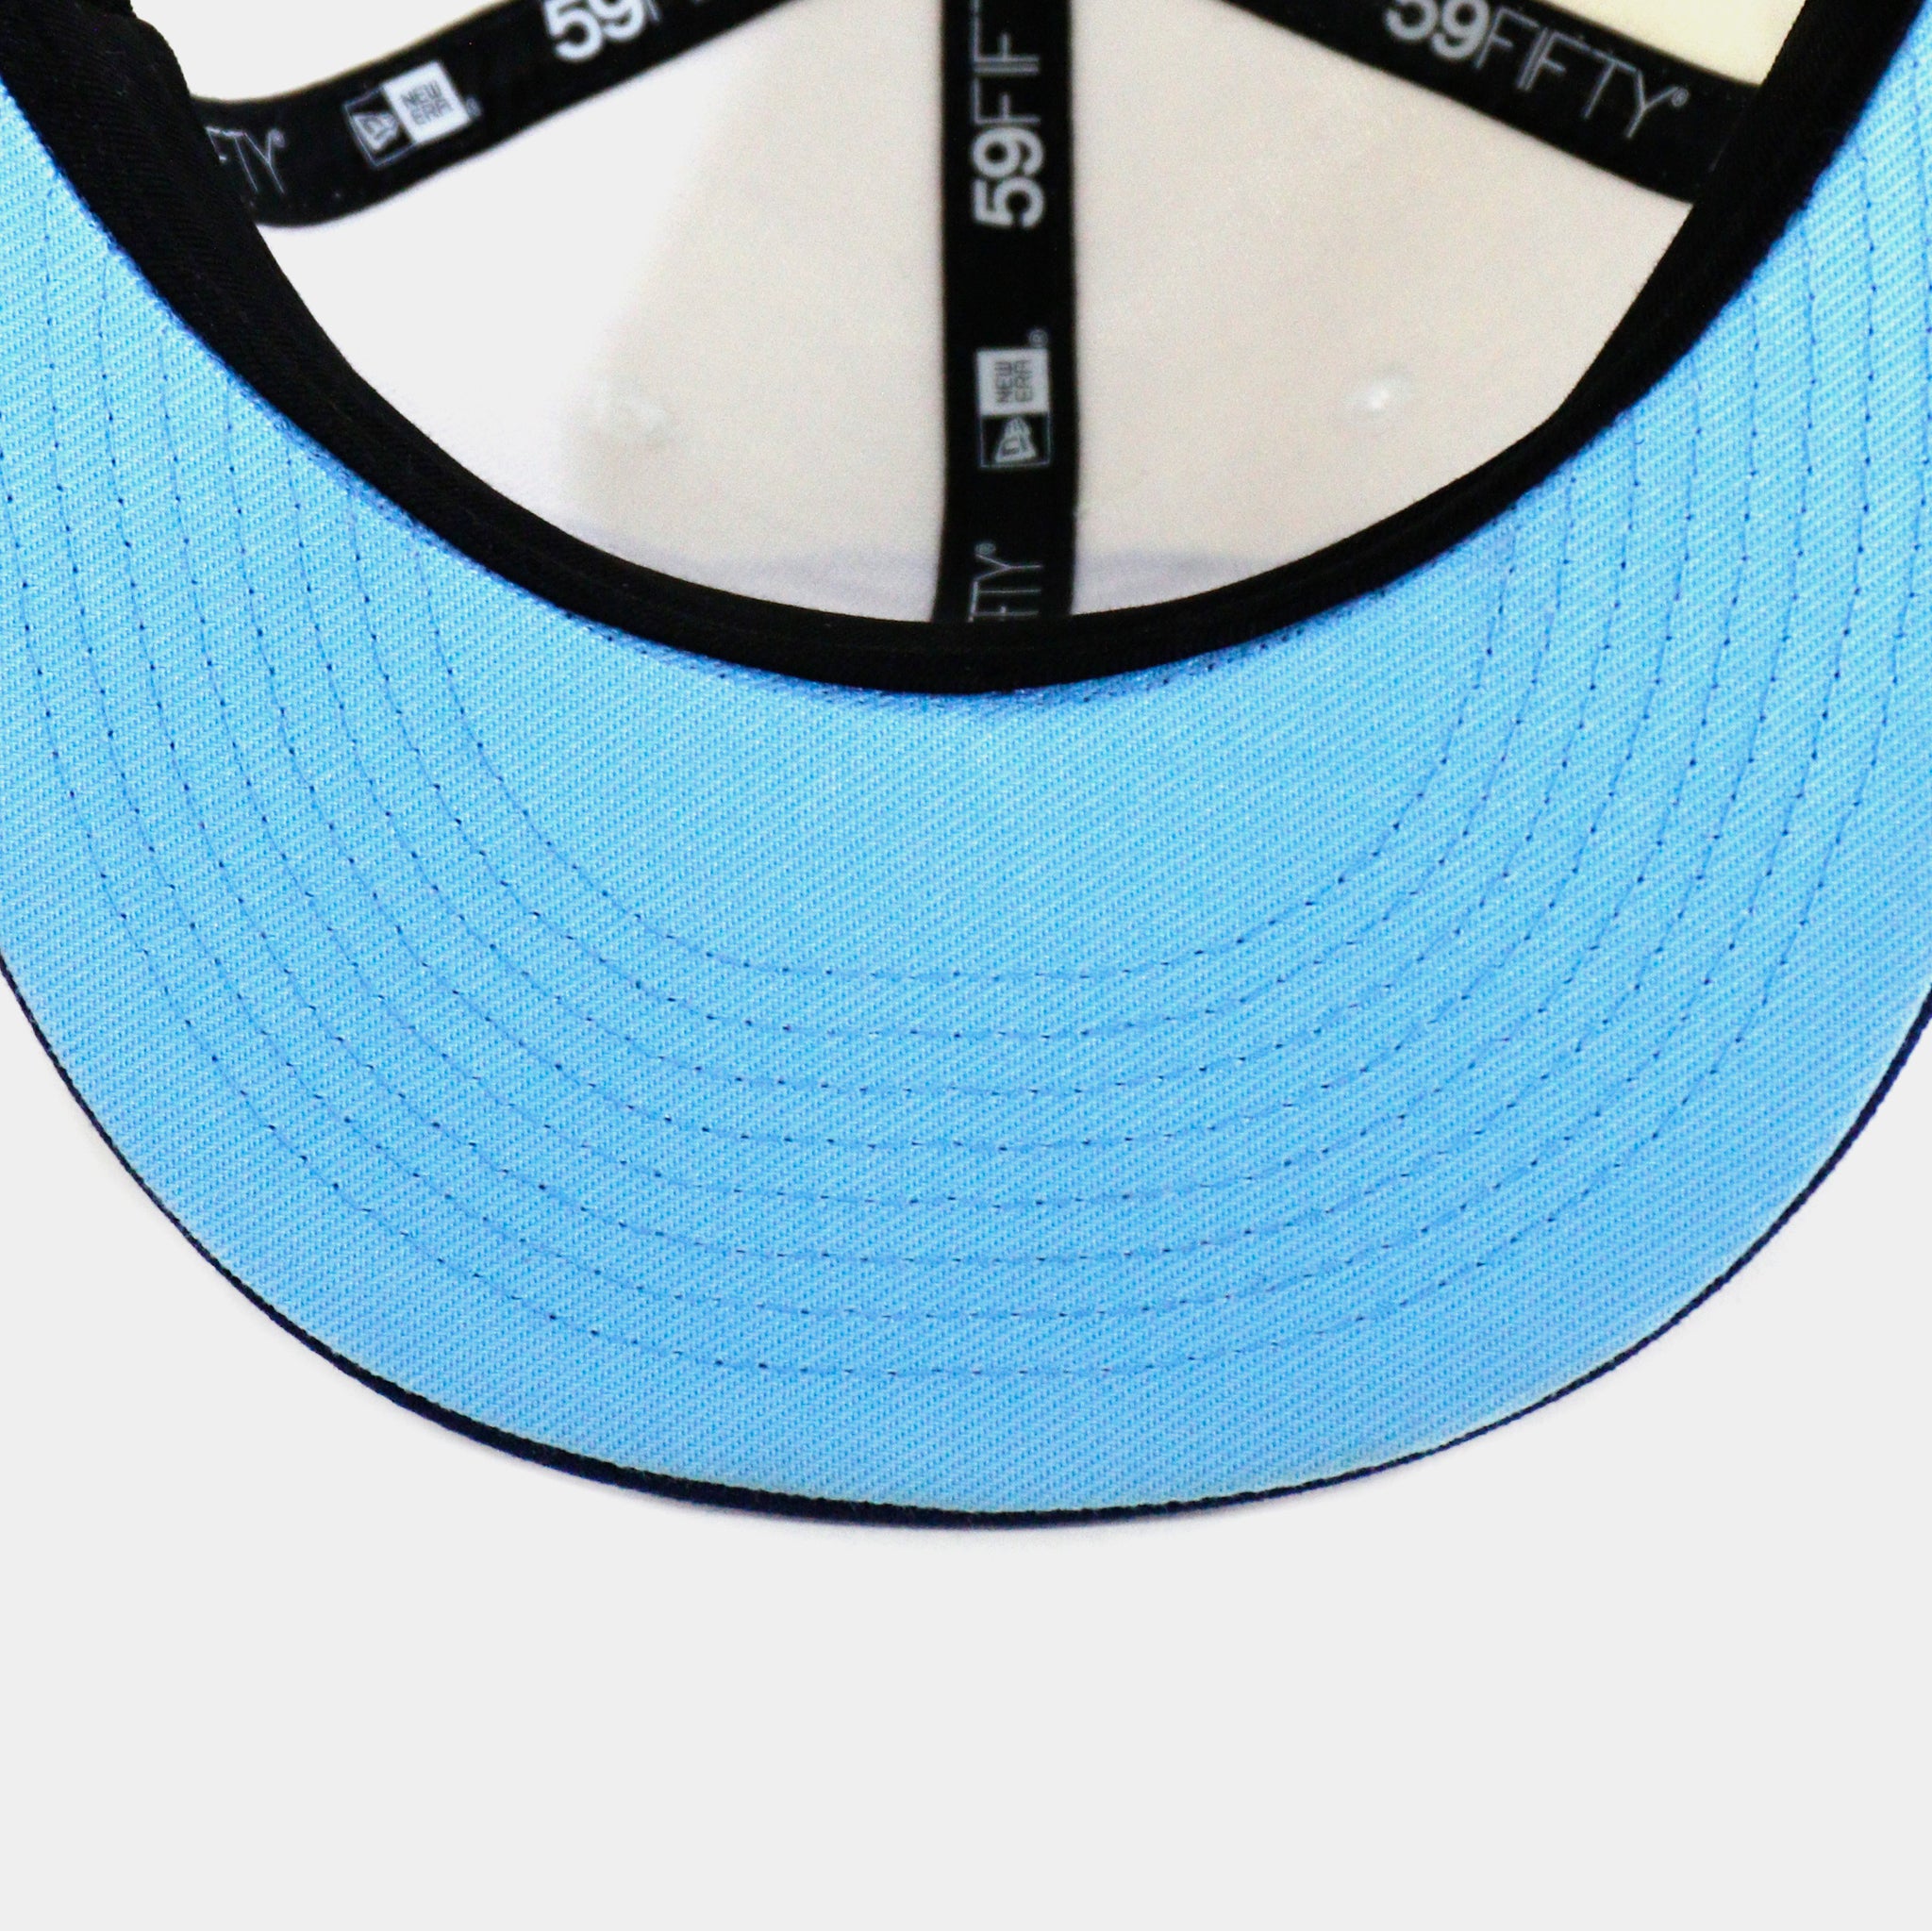 Lids cotton candy San Diego padres 7 1/8 